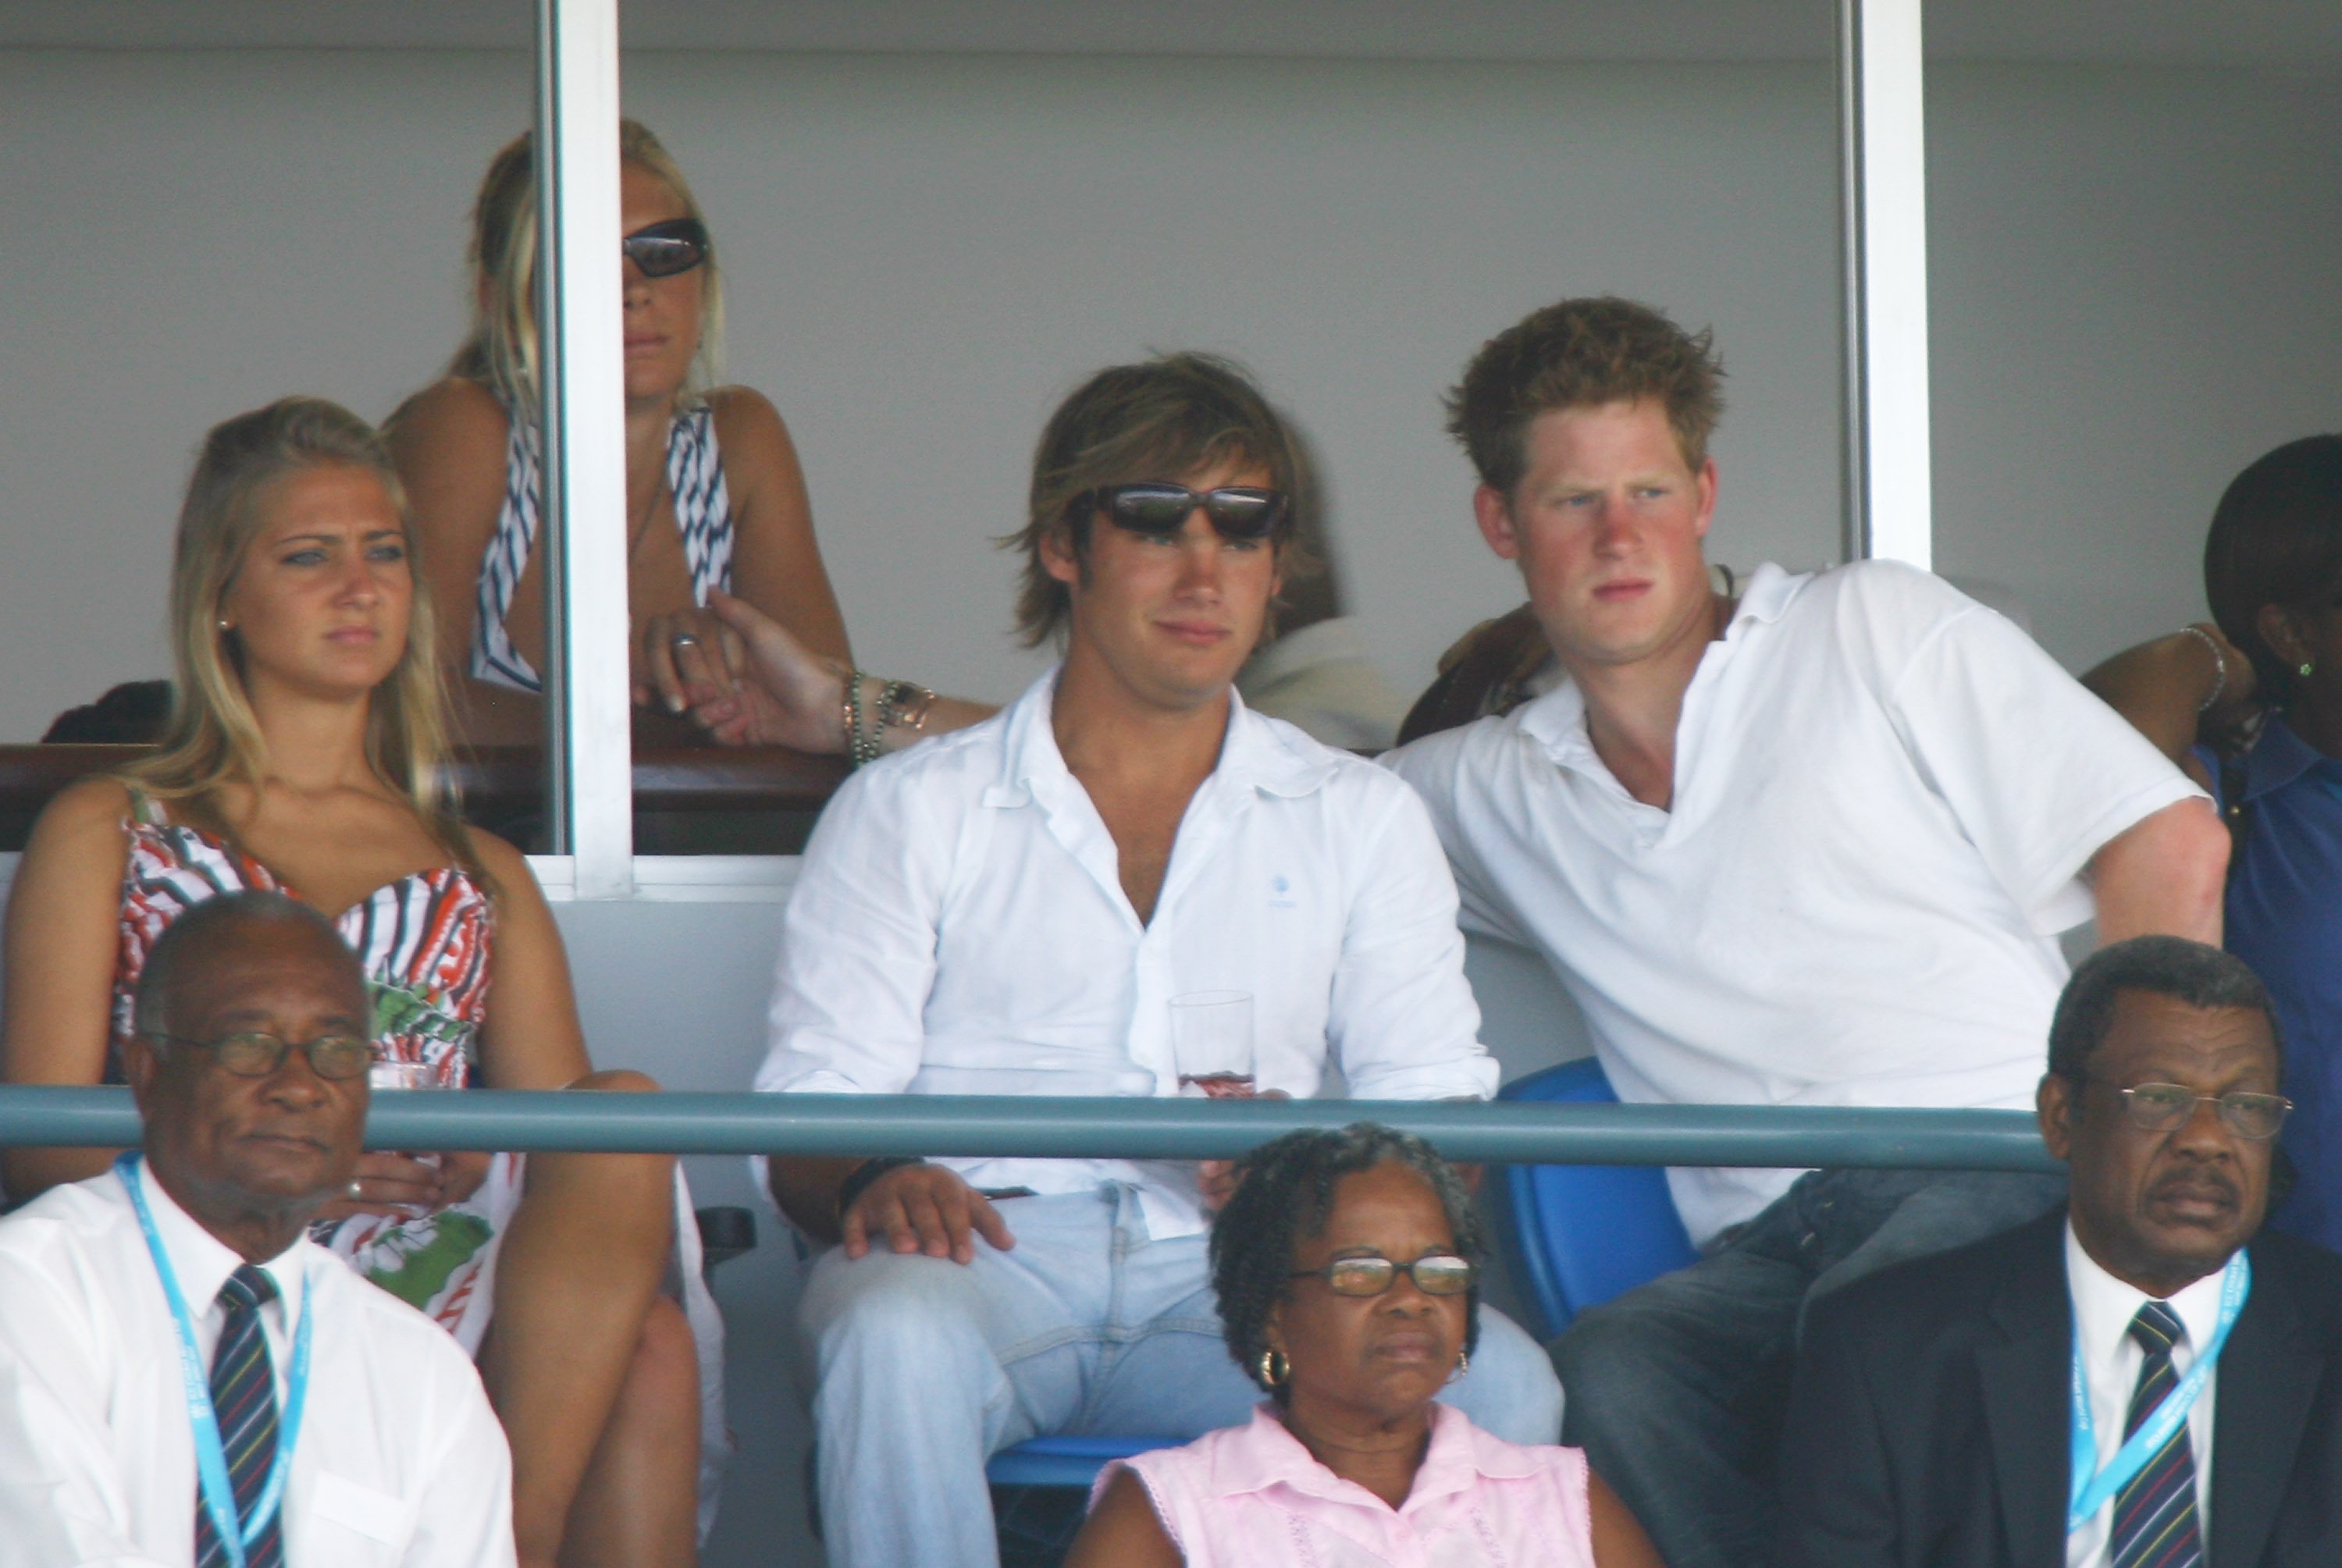 Prince Harry and Chelsy Davy look on during the ICC Cricket World Cup Super Eights match between England and Bangladesh at the Kensington Oval on April 11, 2007 in Bridgetown, Barbados.  | Source: Getty Images